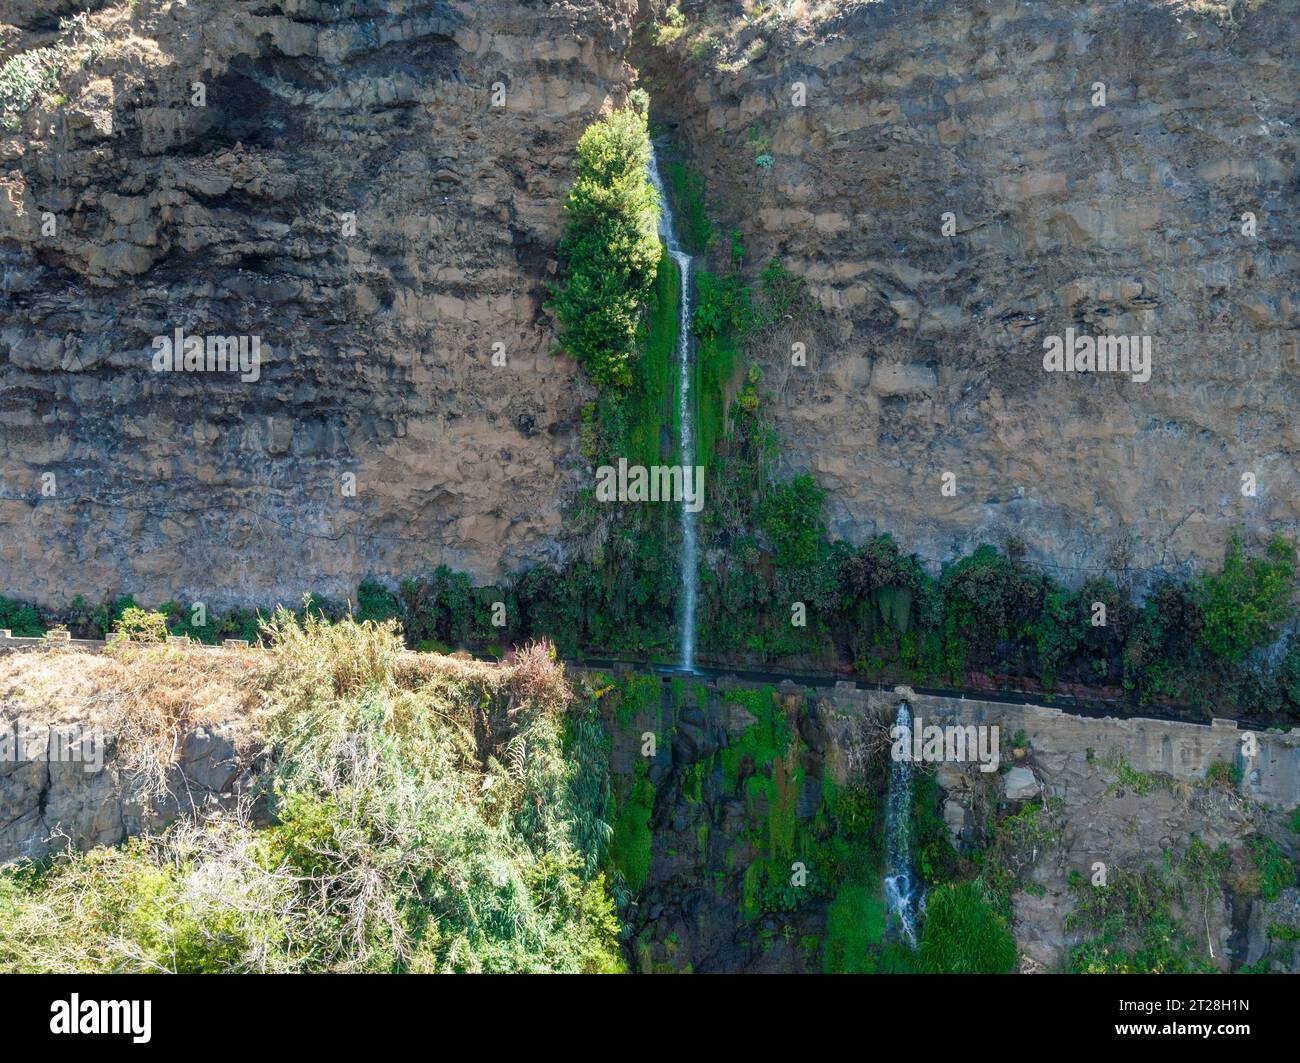 Aerial drone view of Angels waterfall (Cascata dos Anjos) in Madeira island. The waterfall cascades over the rockface onto the regional roadway, and s Stock Photo